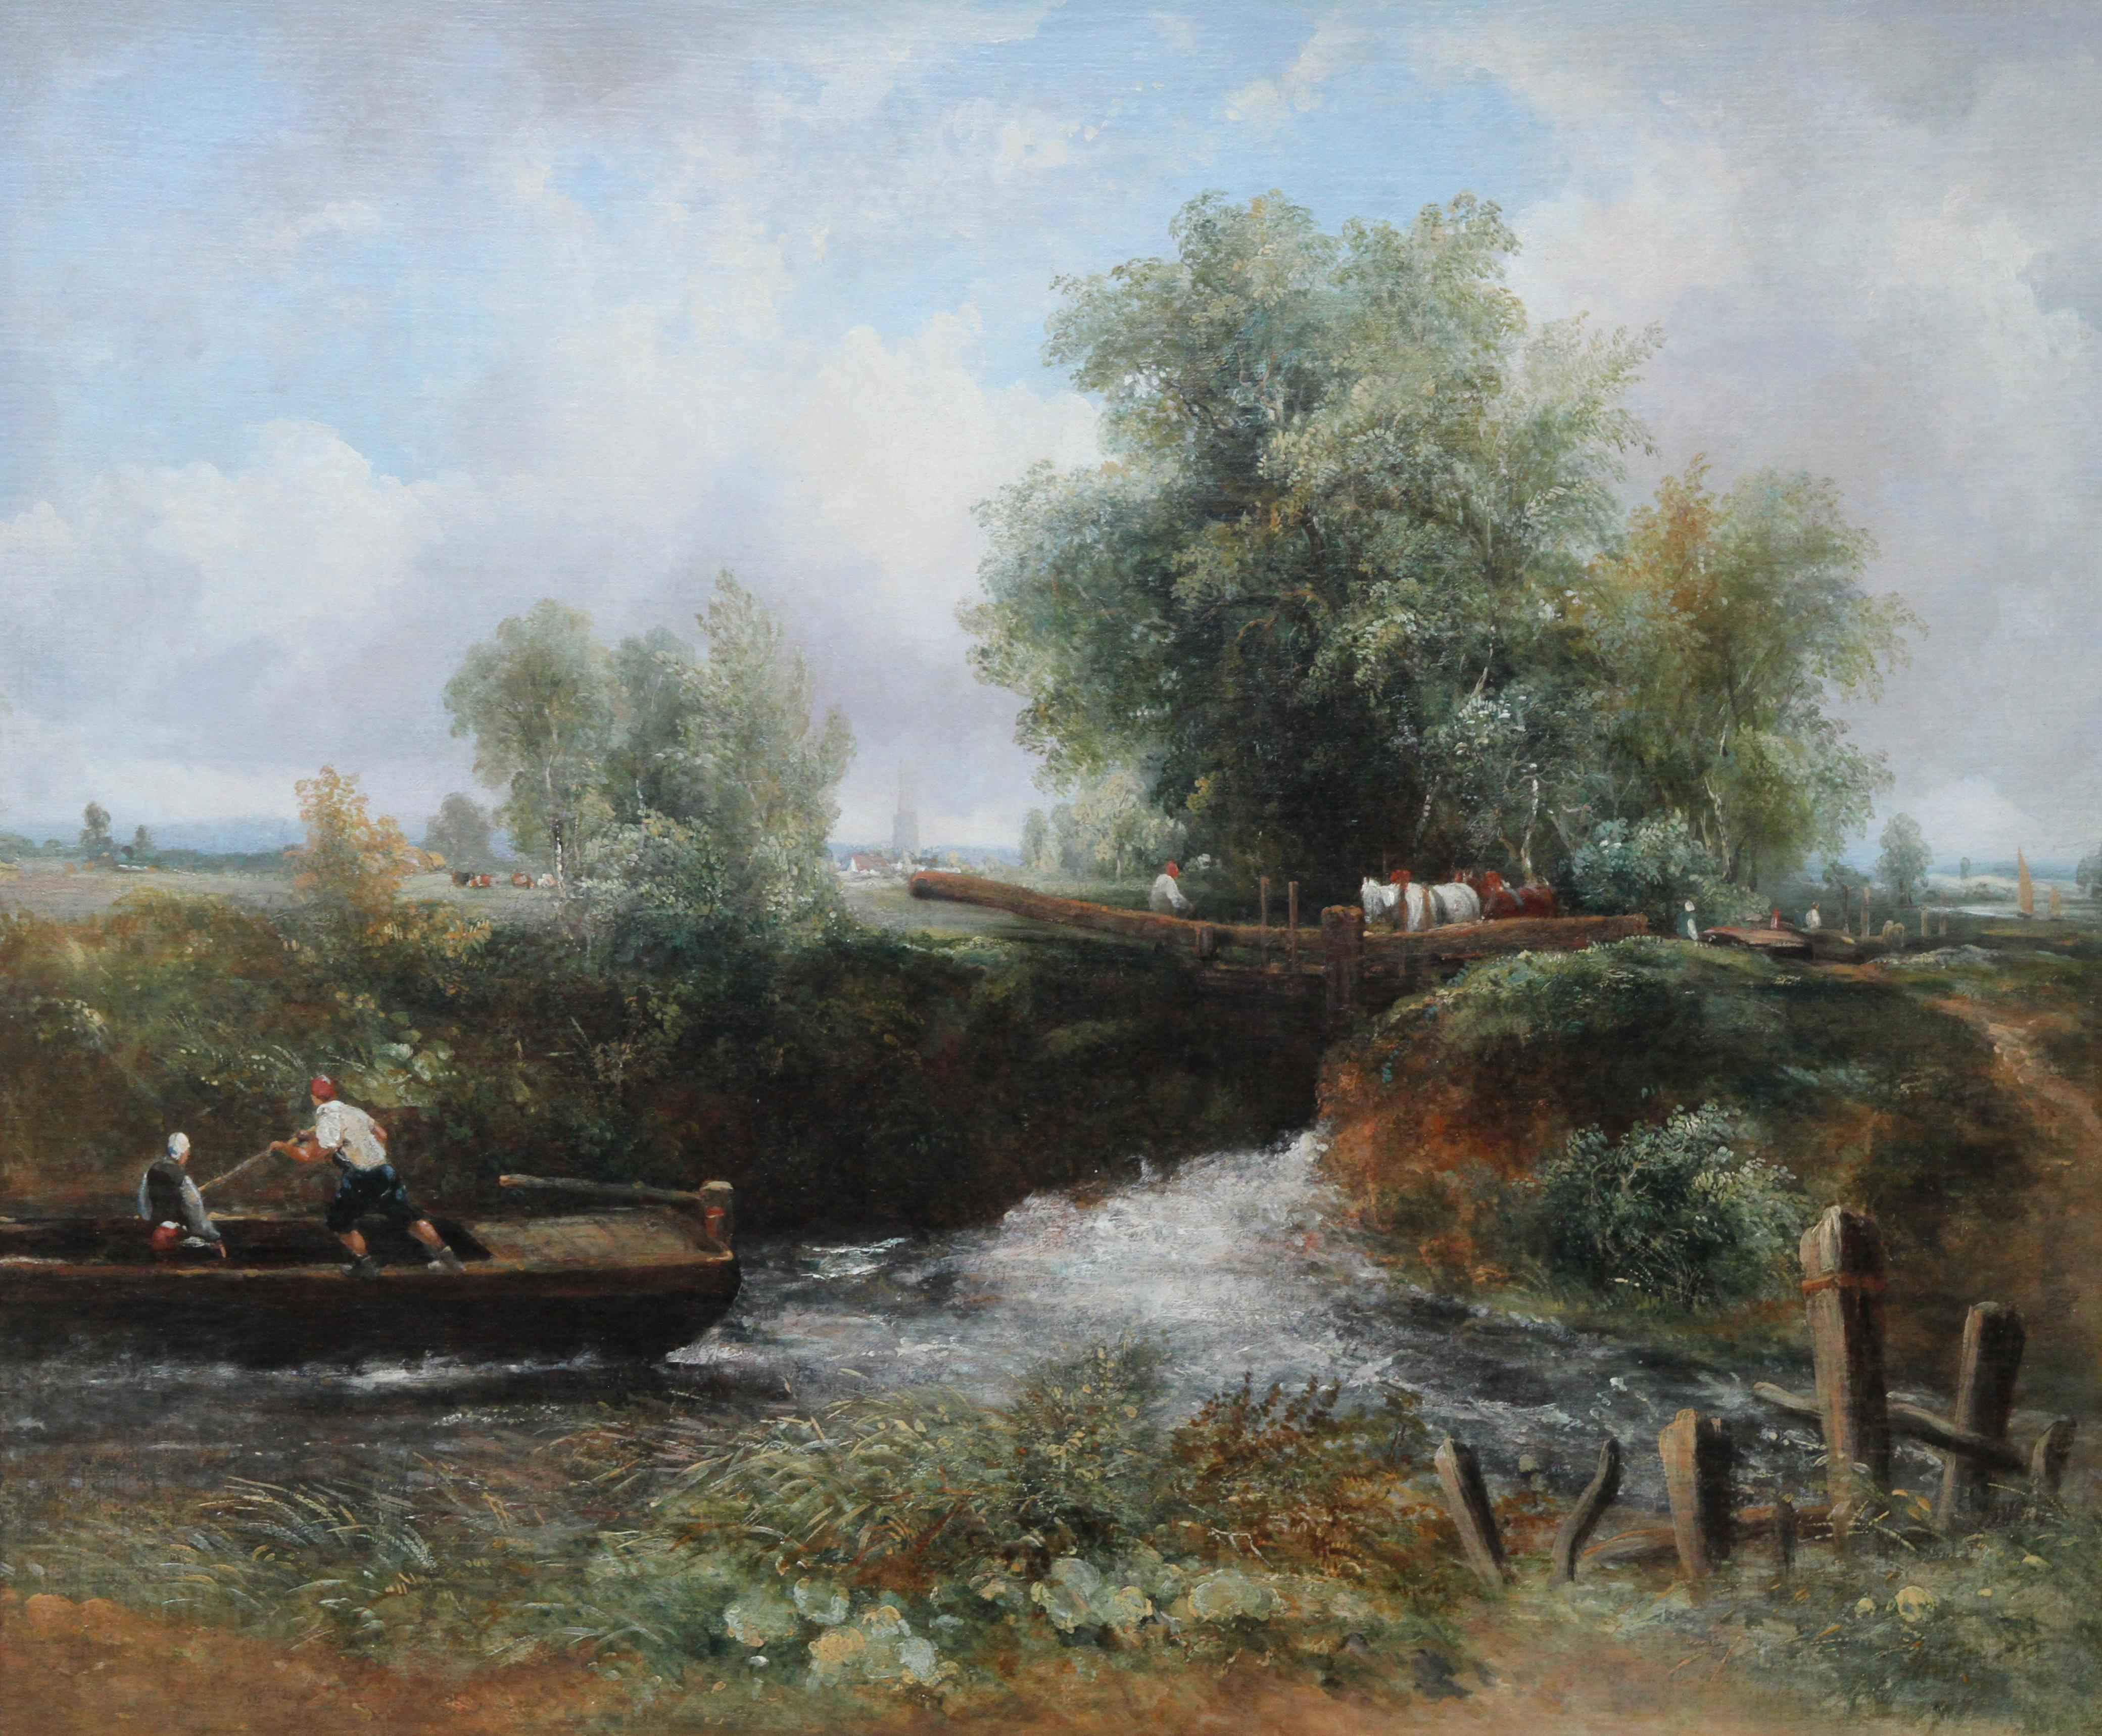 Lock on the Stour - British 19th century art river landscape oil painting - Painting by Frederick Waters Watts